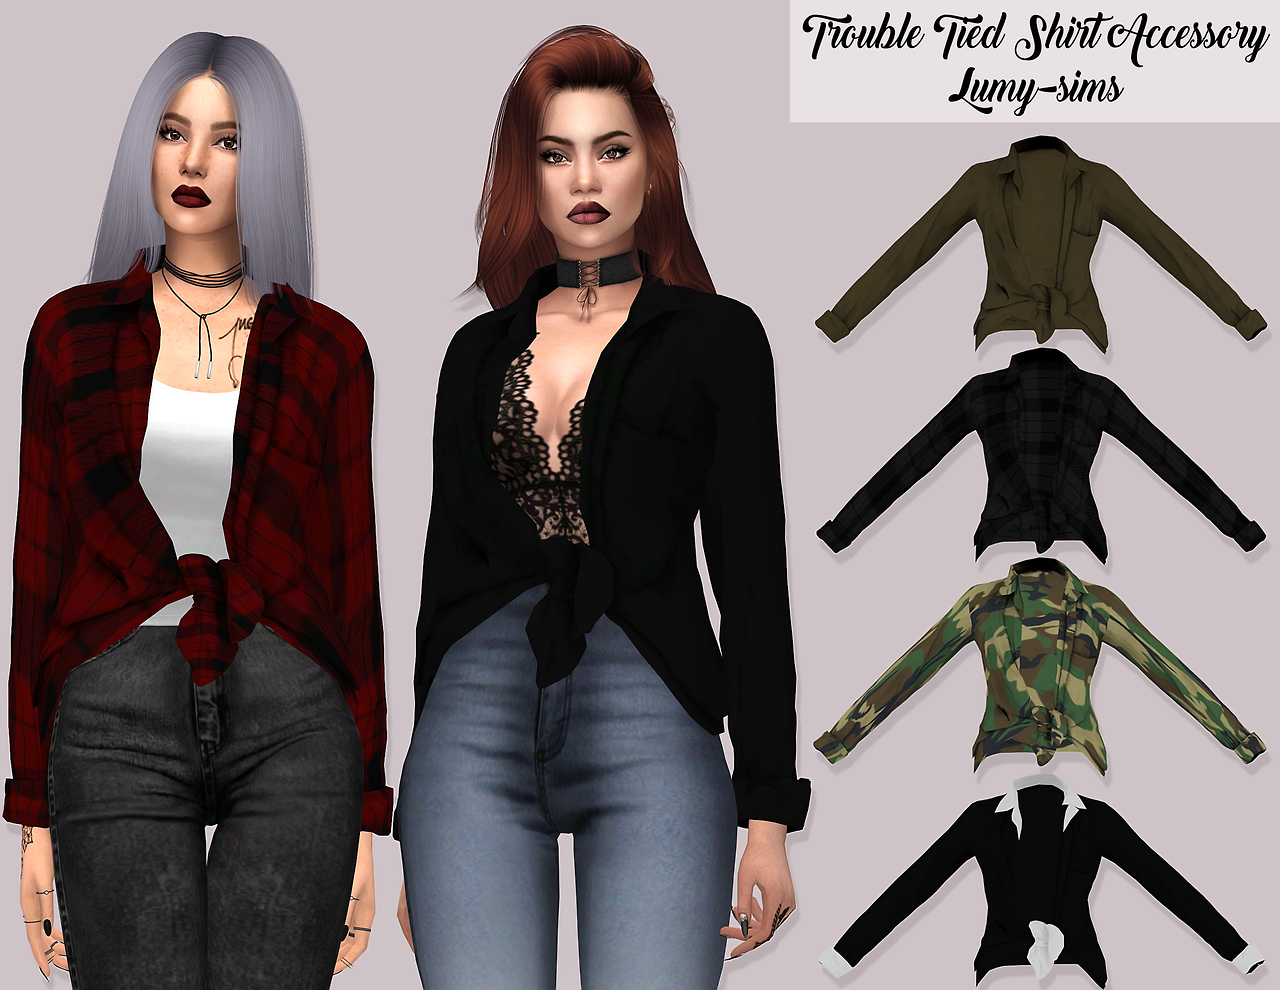 Sims 4 Ccs The Best Trouble Tied Shirt Accessory By Lumy Sims